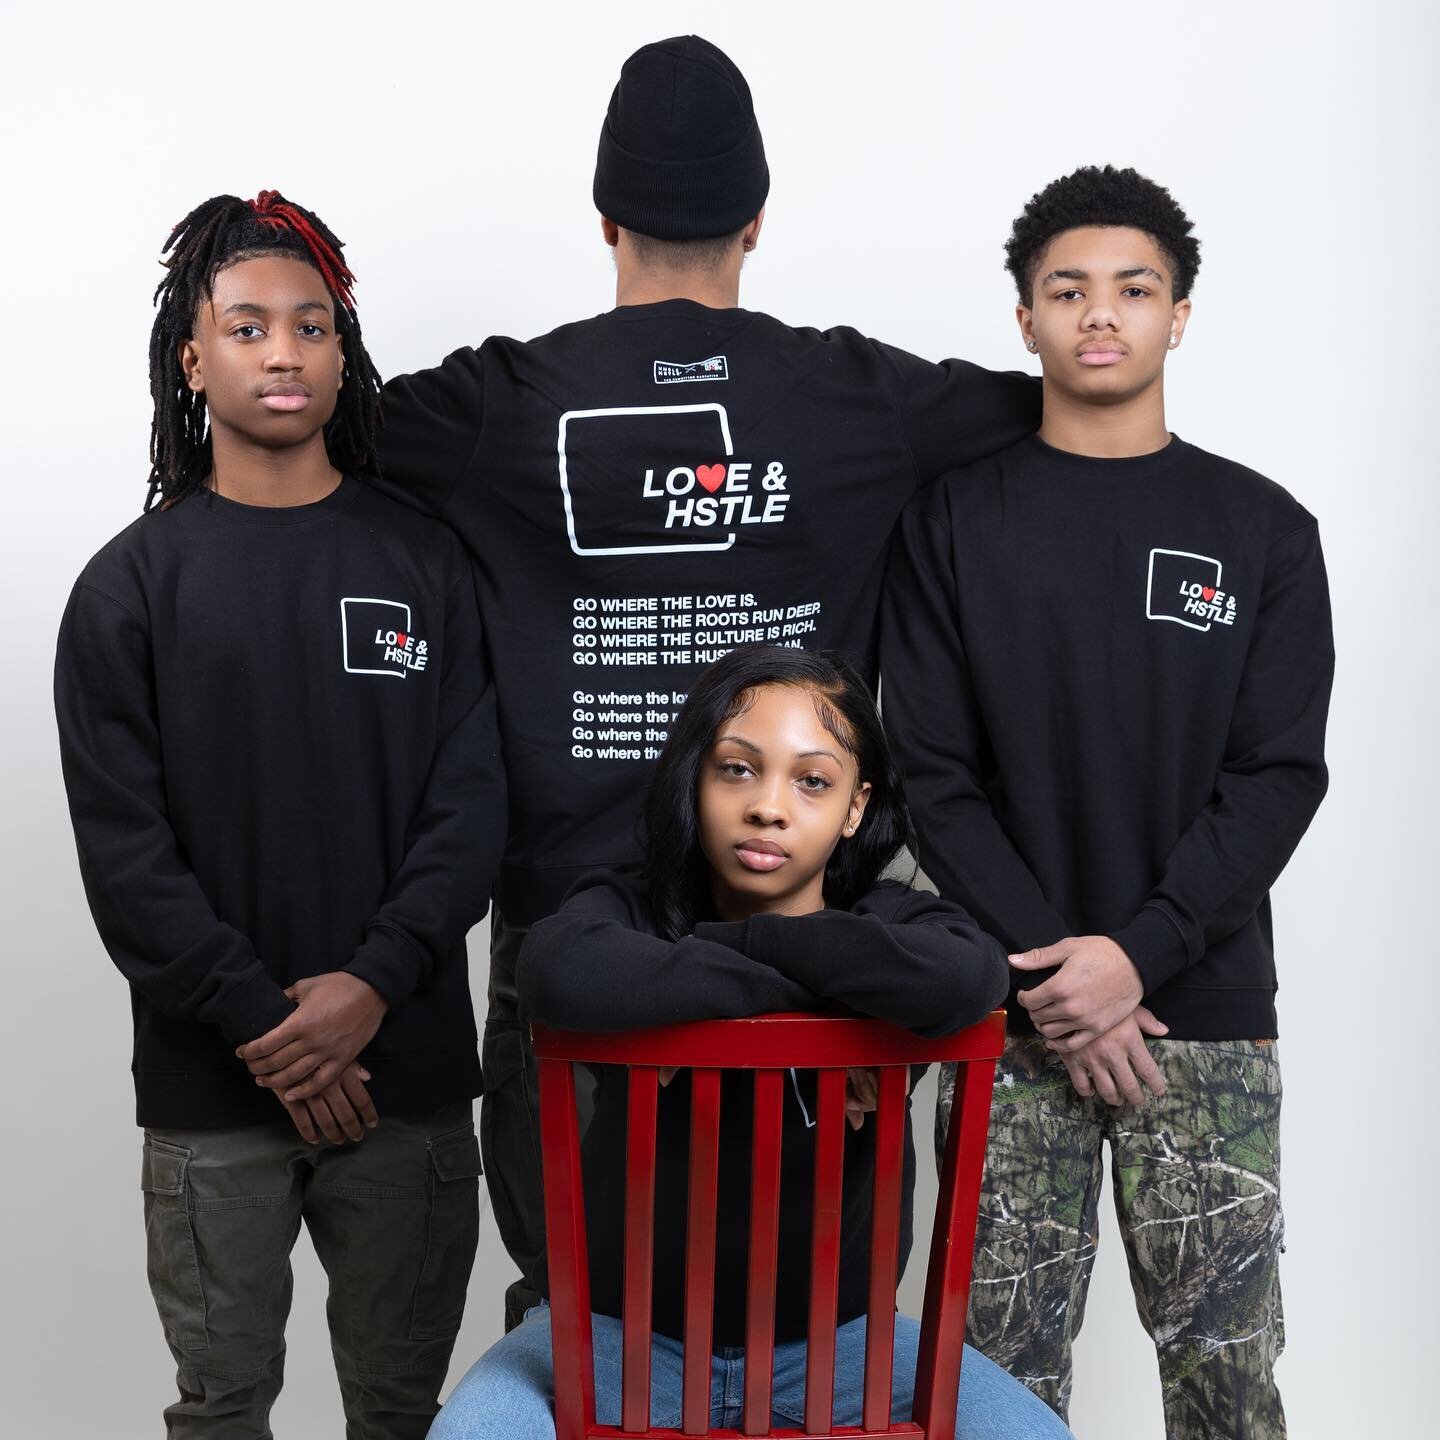 Love &amp; Hstle it&rsquo;s all in the family.

#love #hmblehstleclothing #losangeles  #newyork #virginia